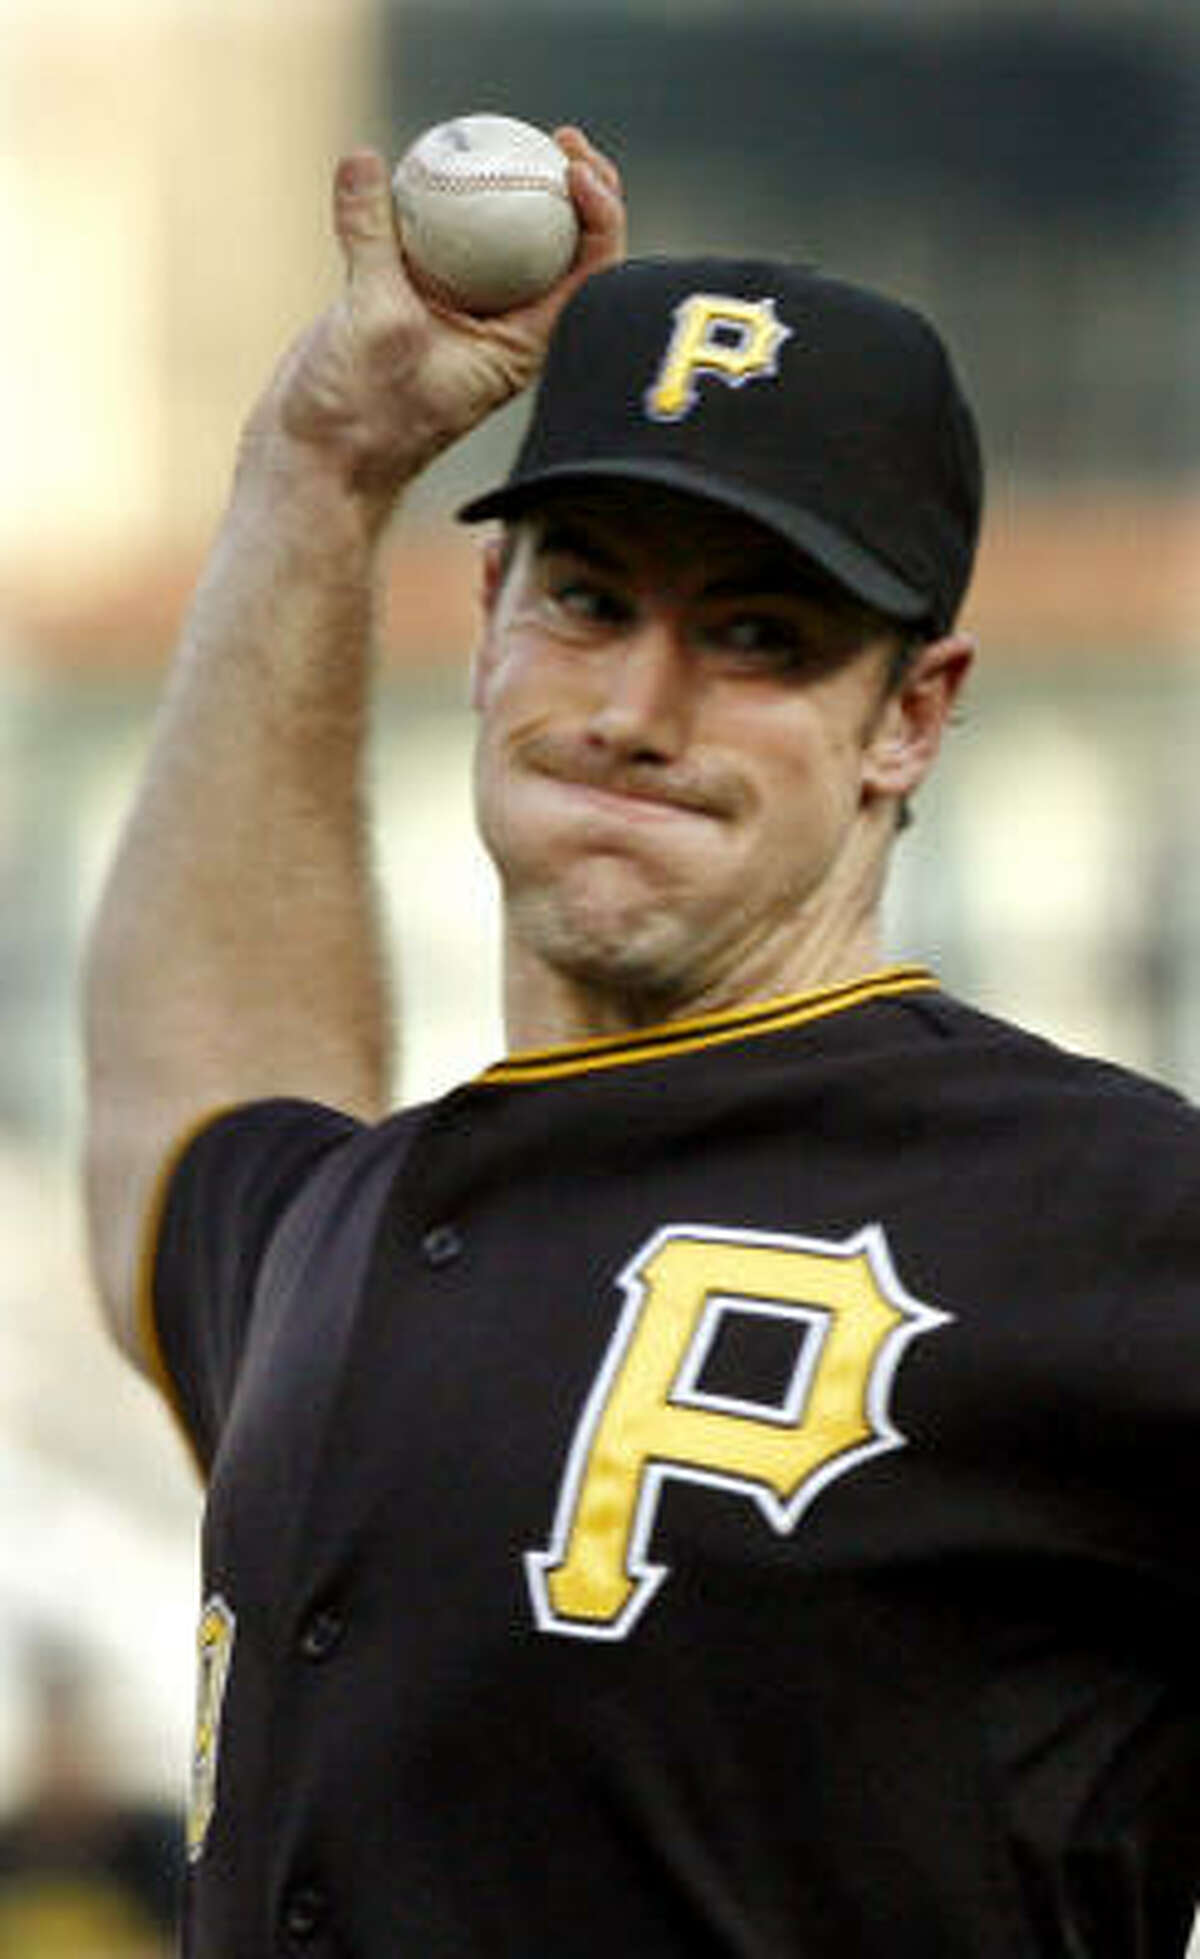 The Astros tagged Pirates starter Ross Ohlendorf with 4 runs on 8 hits in 5 innings of work.